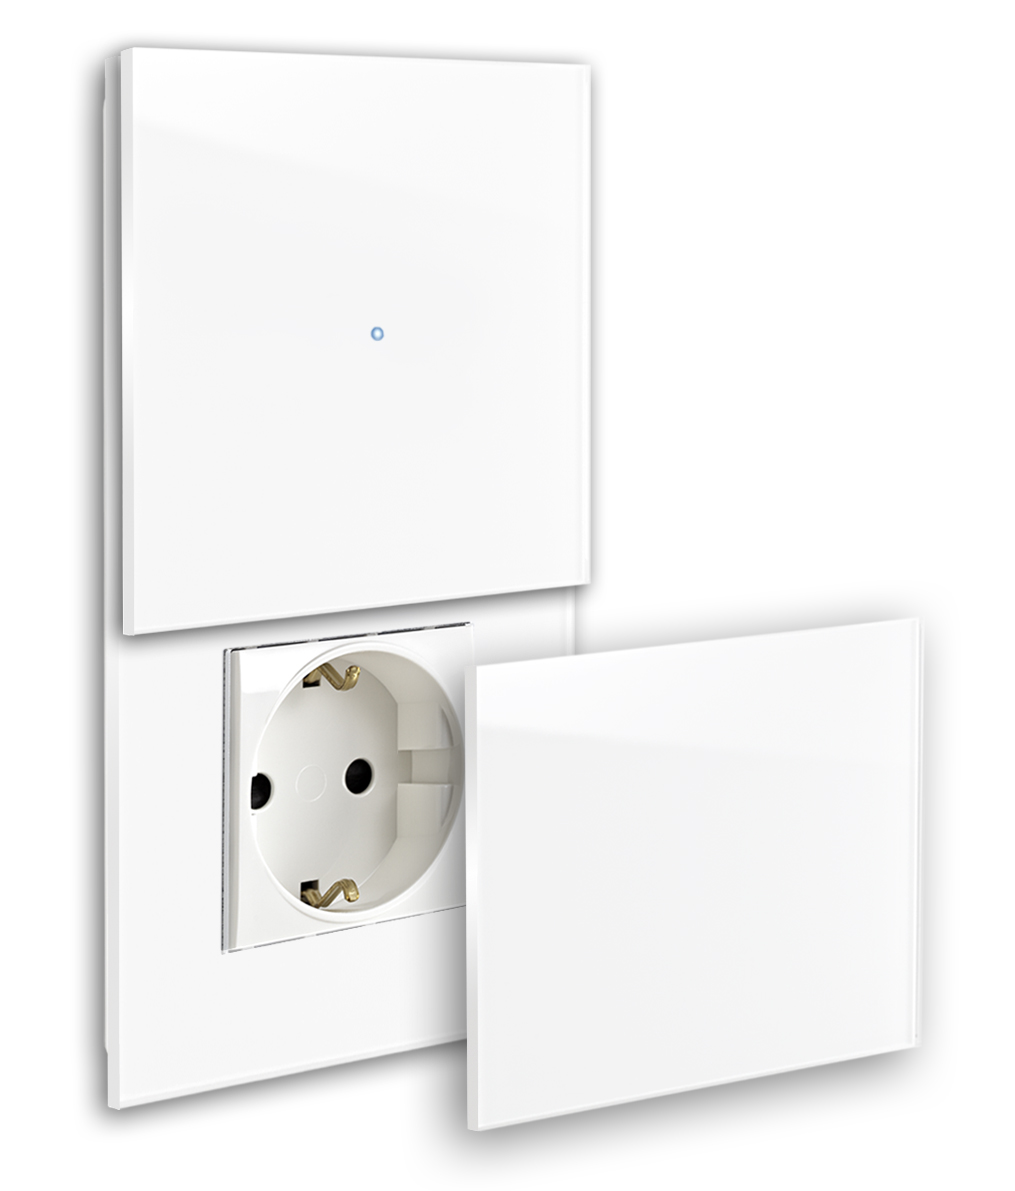 Touch Light Switch and Socket Combination. 230V Glass Look. NOVA